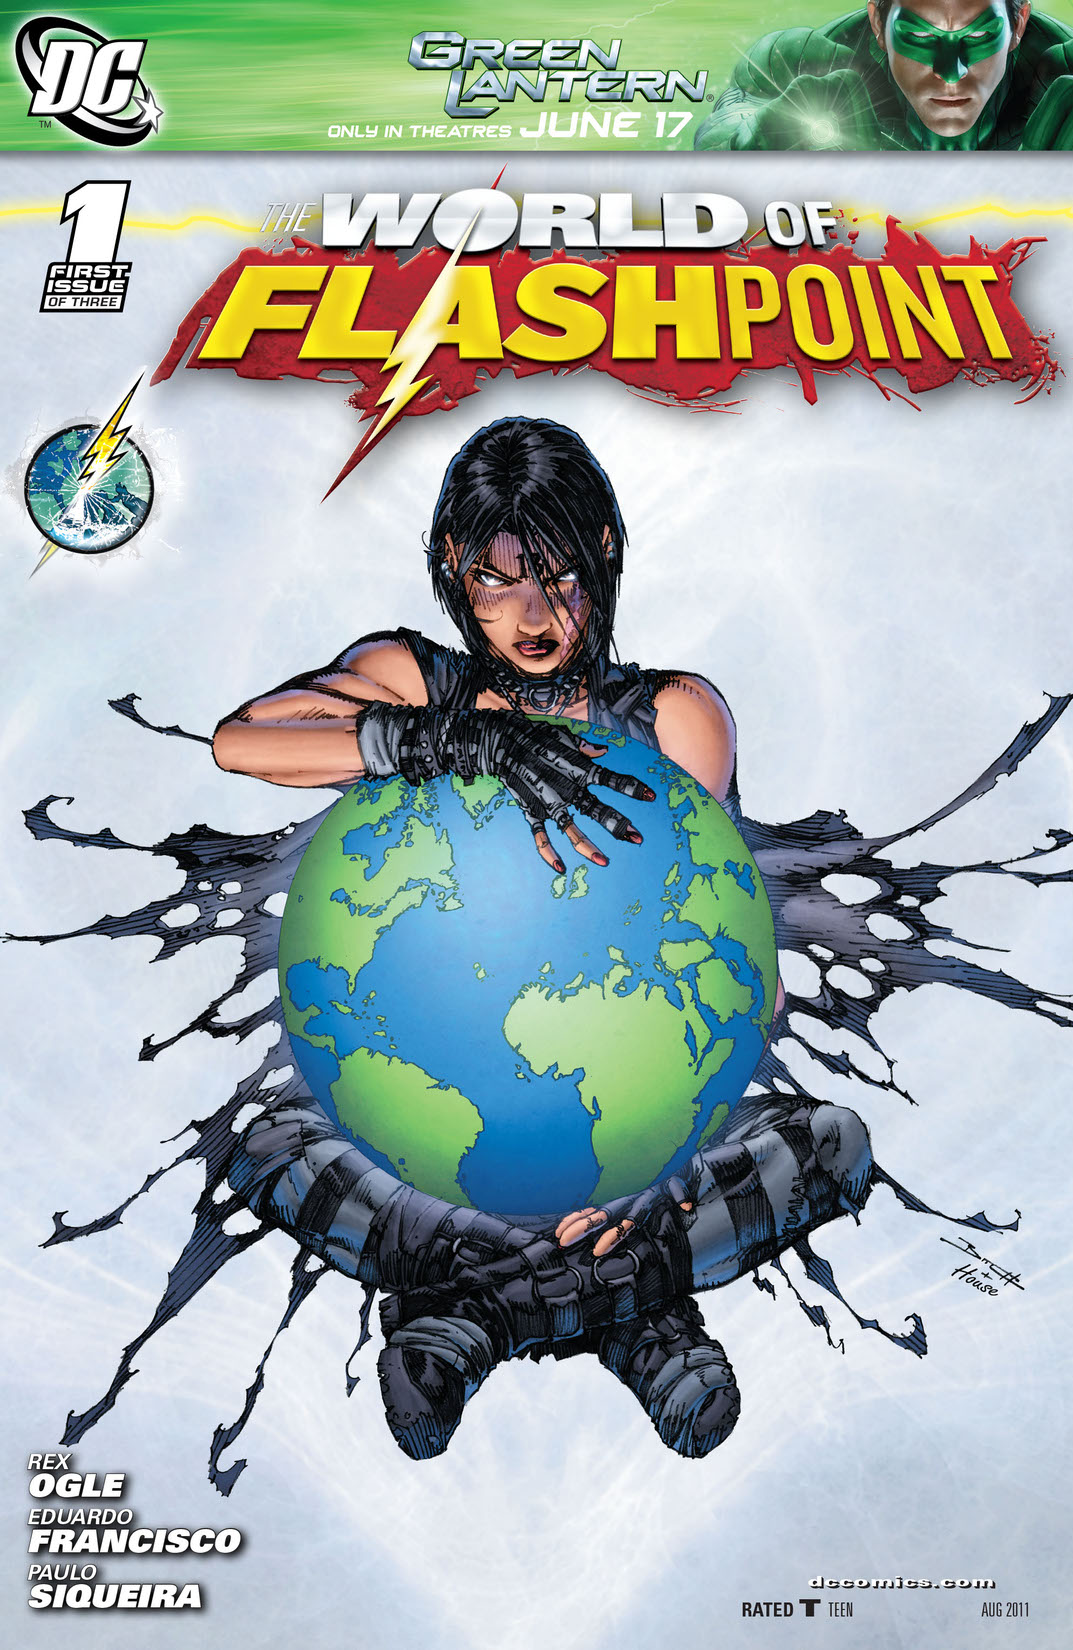 Flashpoint: The World of Flashpoint #1 preview images